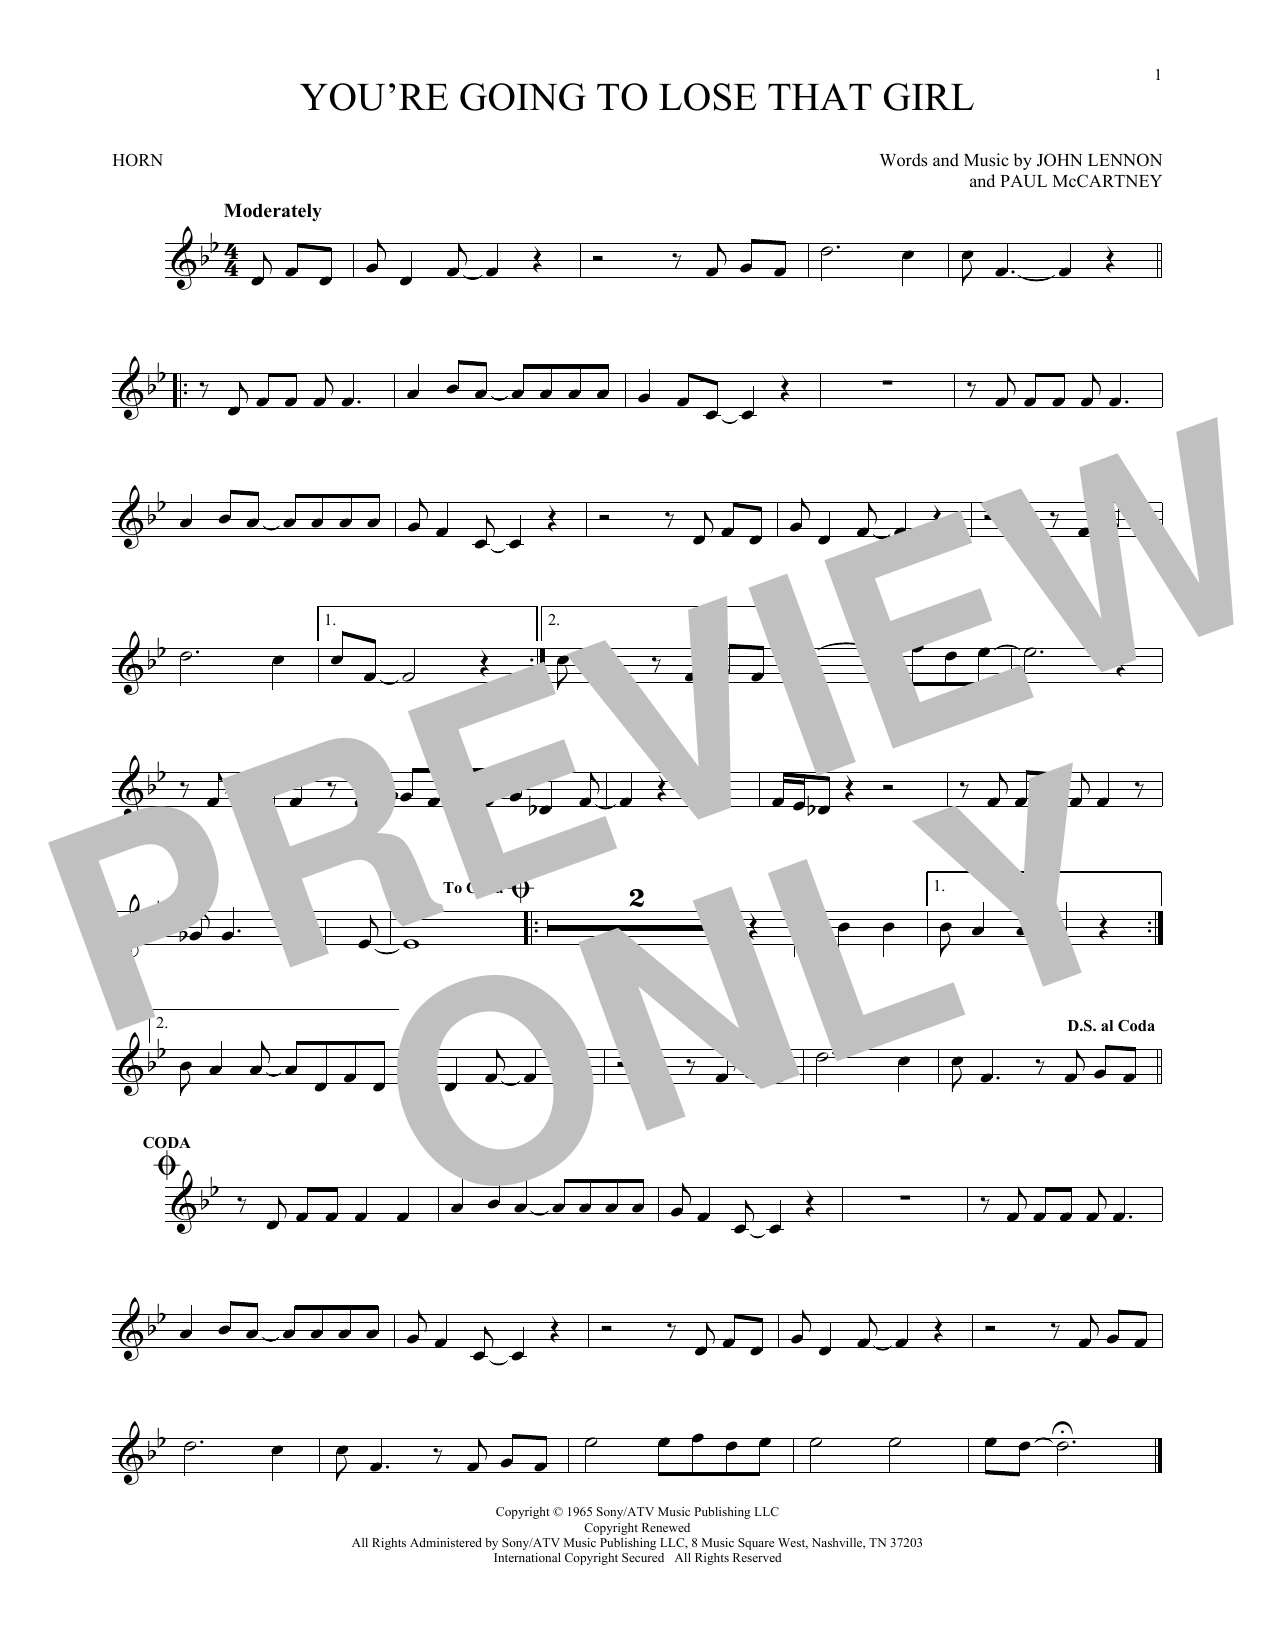 Download The Beatles You're Going To Lose That Girl Sheet Music